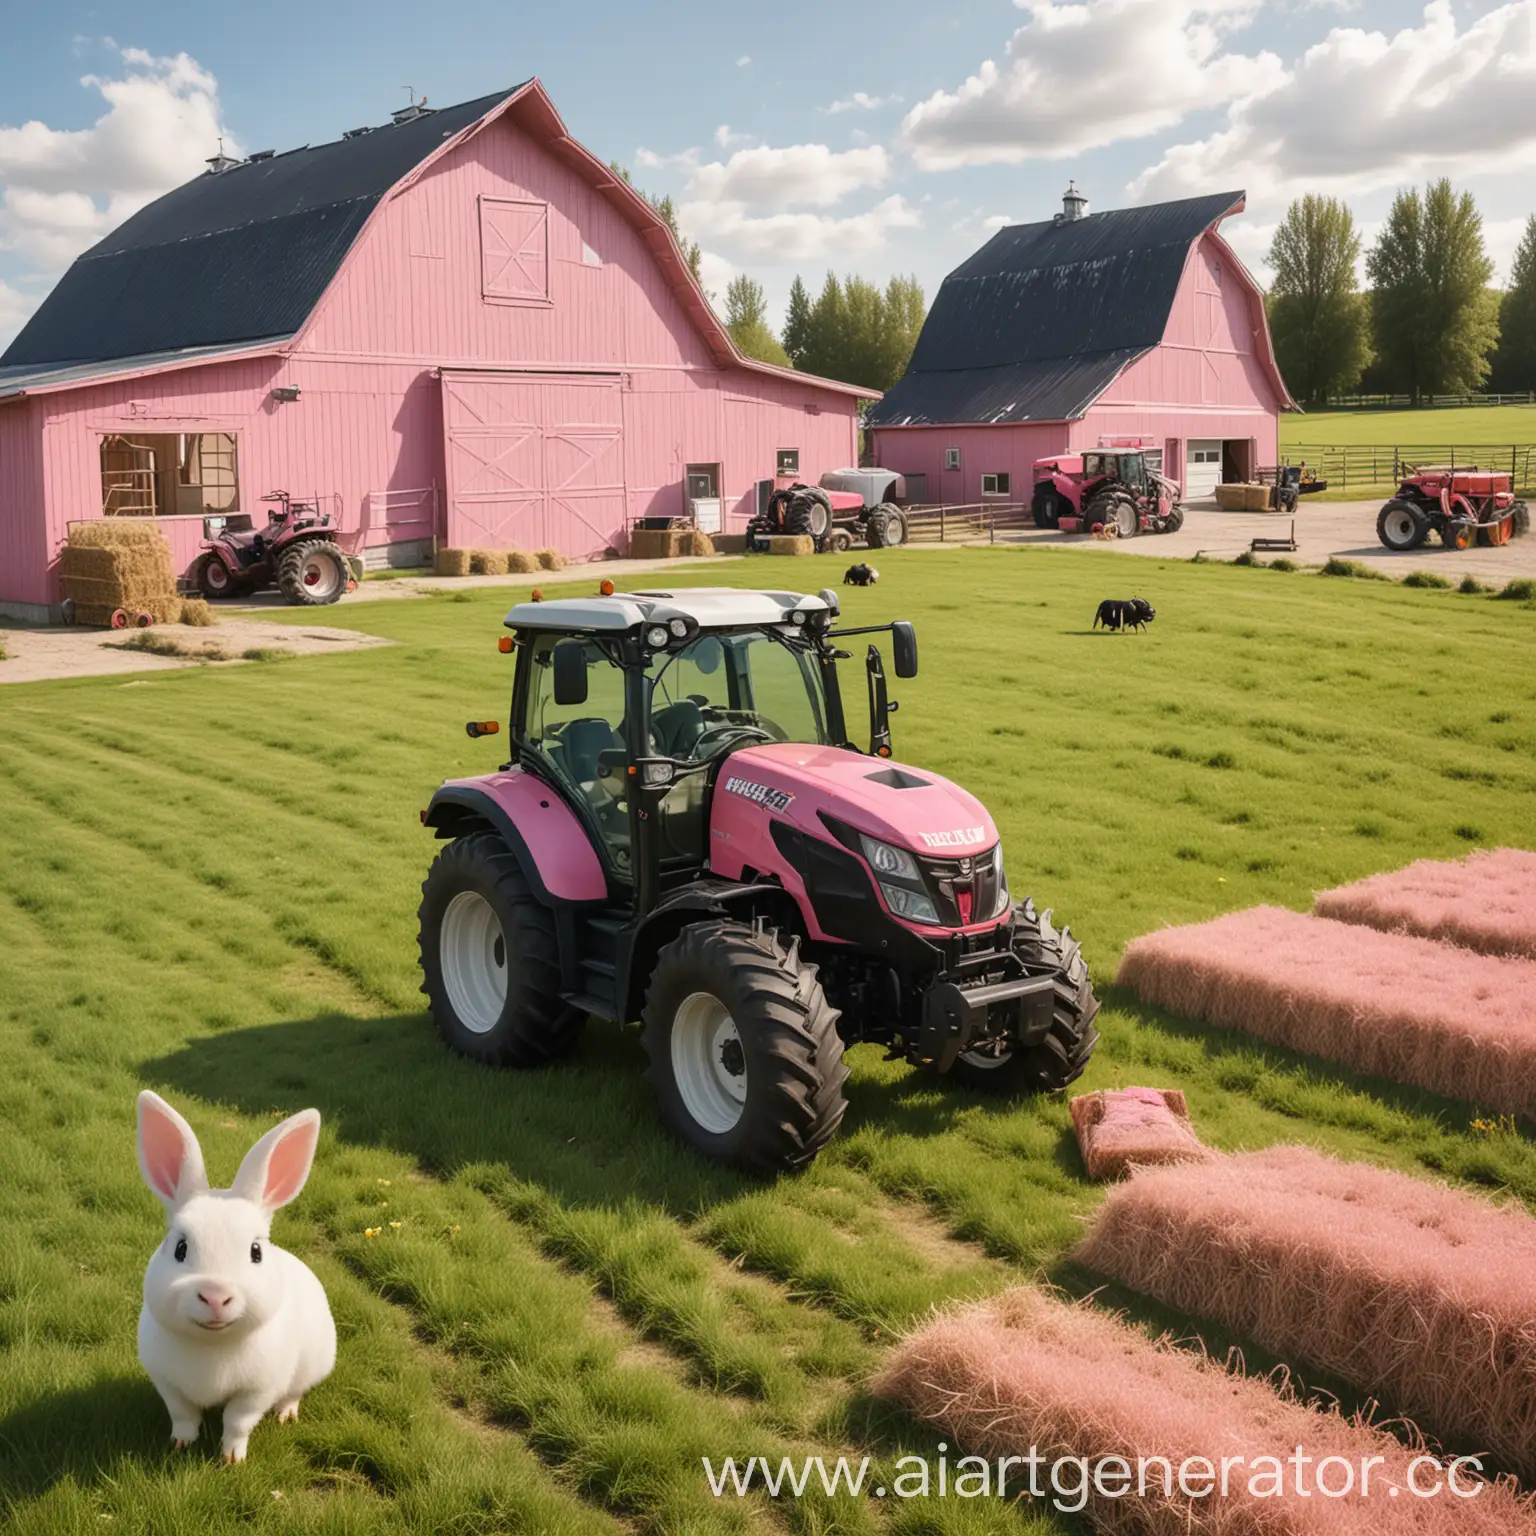 Cartoon-Cow-Driving-Valtra-Tractor-in-Pink-Grass-Field-with-Barn-and-Hay